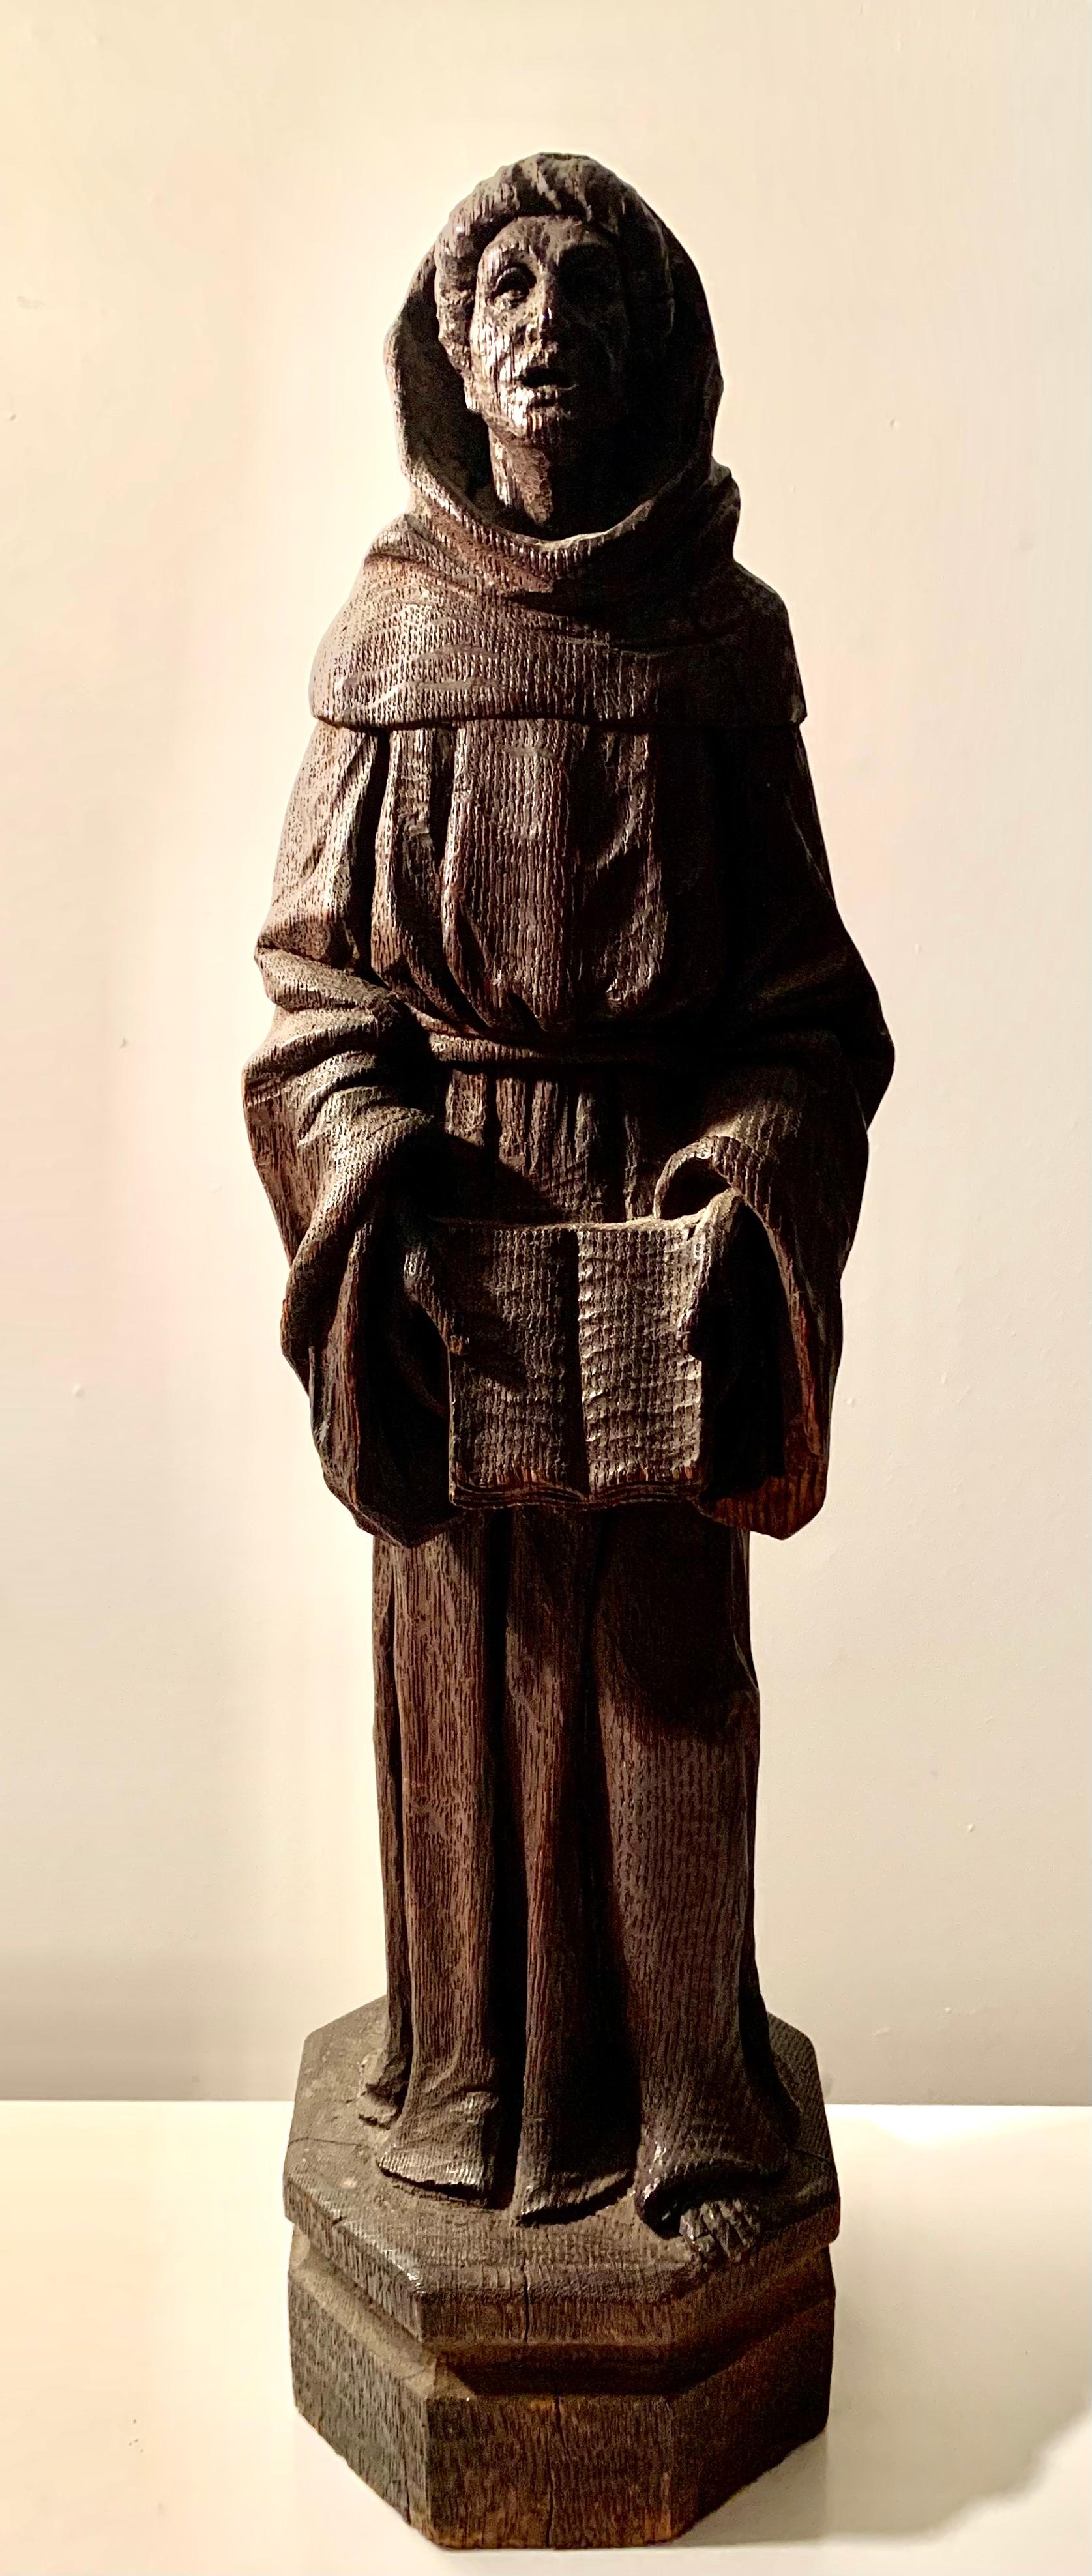 Antique Large Carved Oak Figure of Saint Anthony of Padua, 18th-19th Century For Sale 3